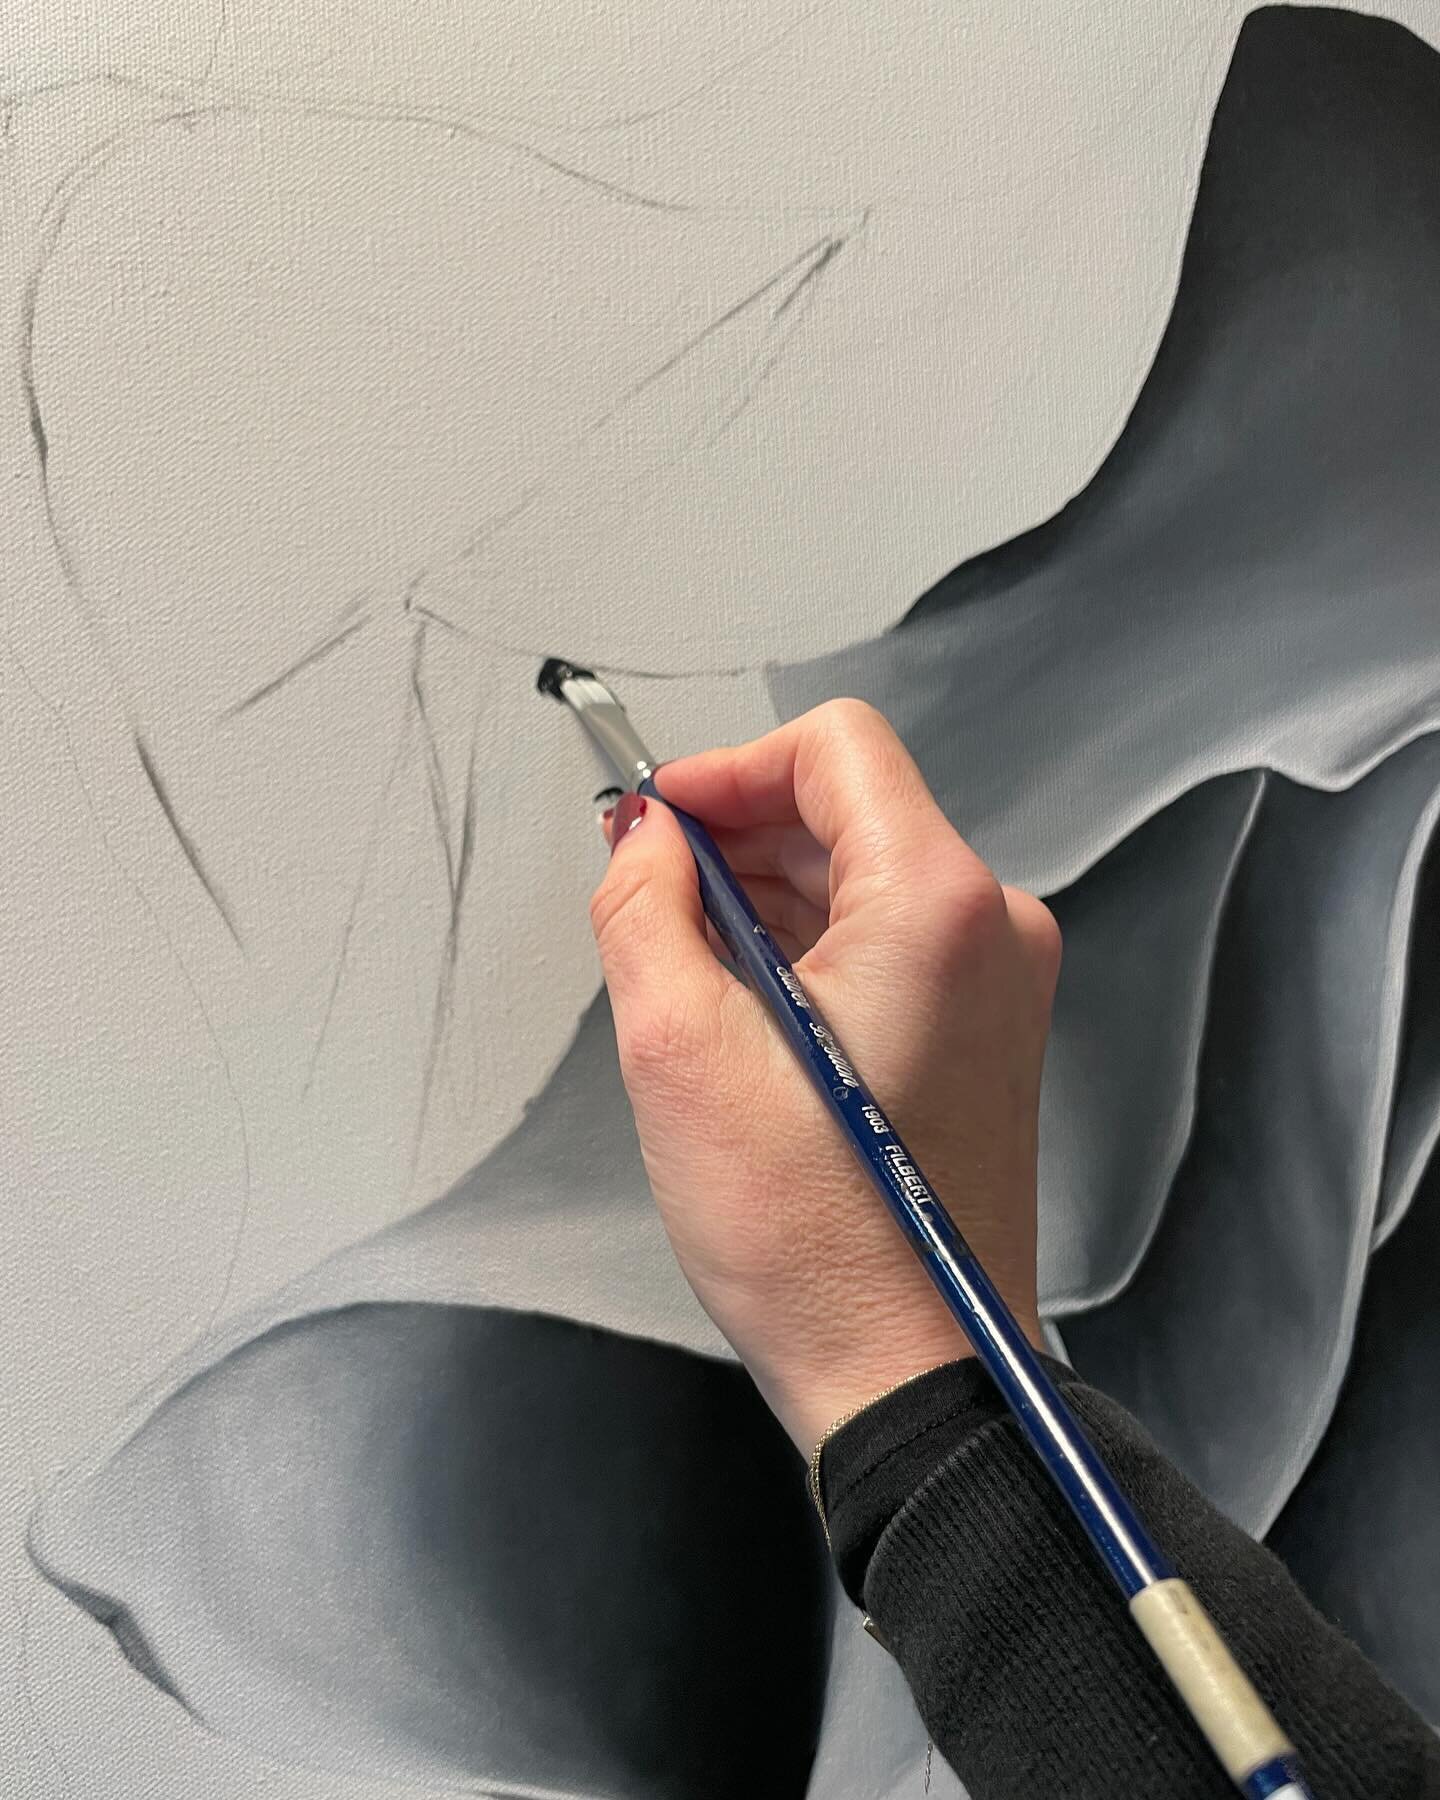 Working on this awesome flower all in shades of black and white while trying not to dance while blasting Christmas music - tis the season :) #blackandwhitepainting #blackandwhitepaintings #contemporarypainting #floralart #roses #christmasmusictime